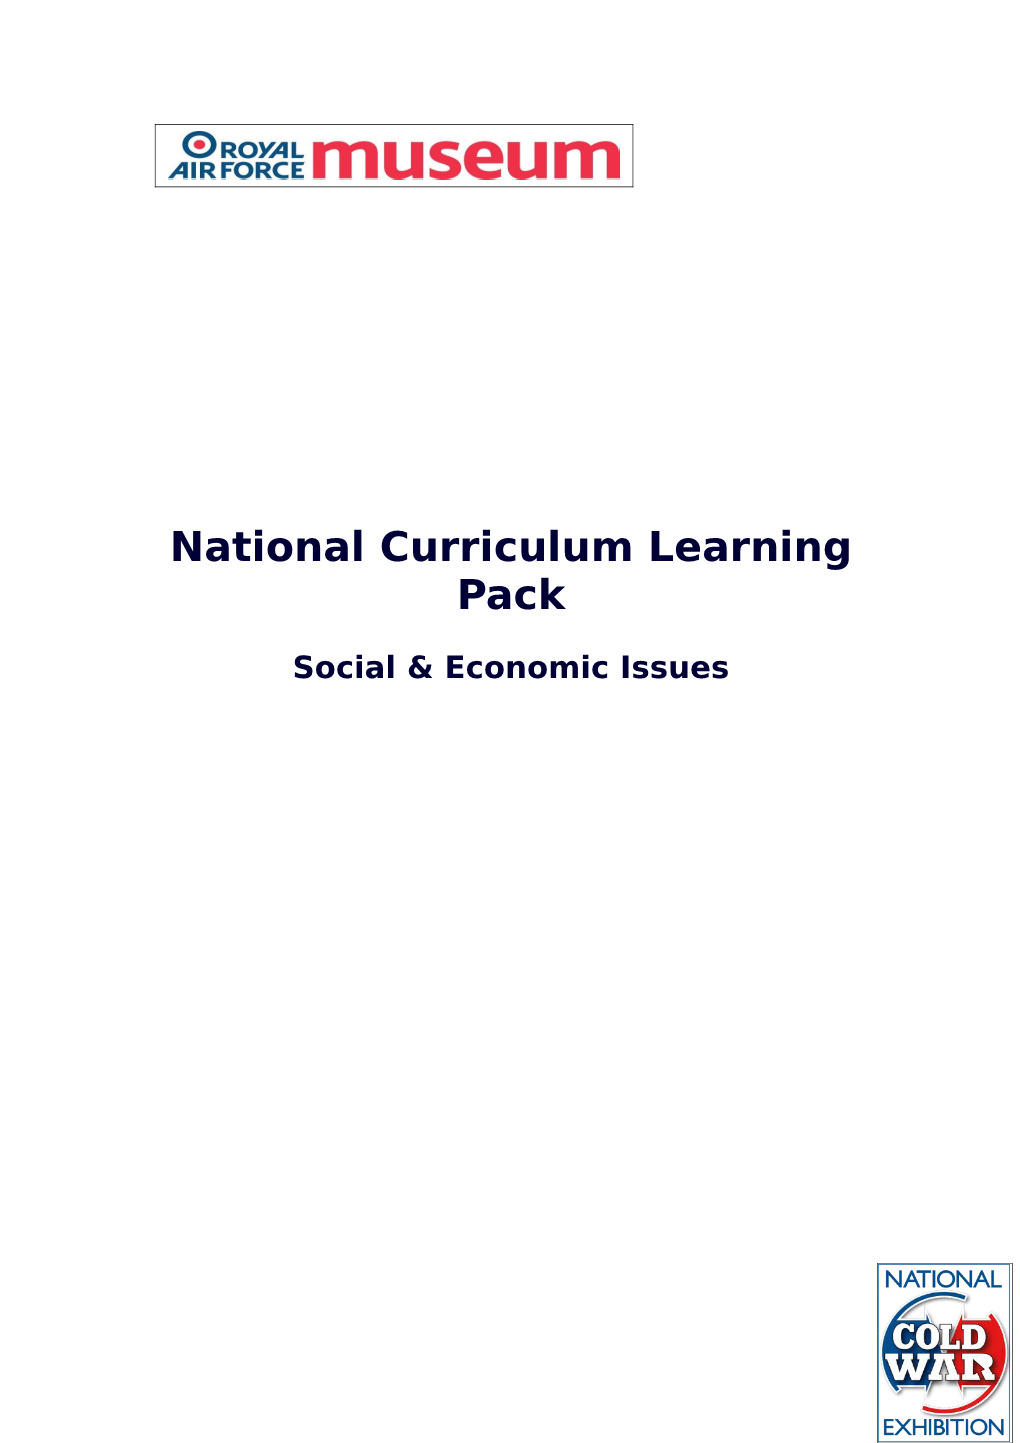 National Curriculum Learning Pack